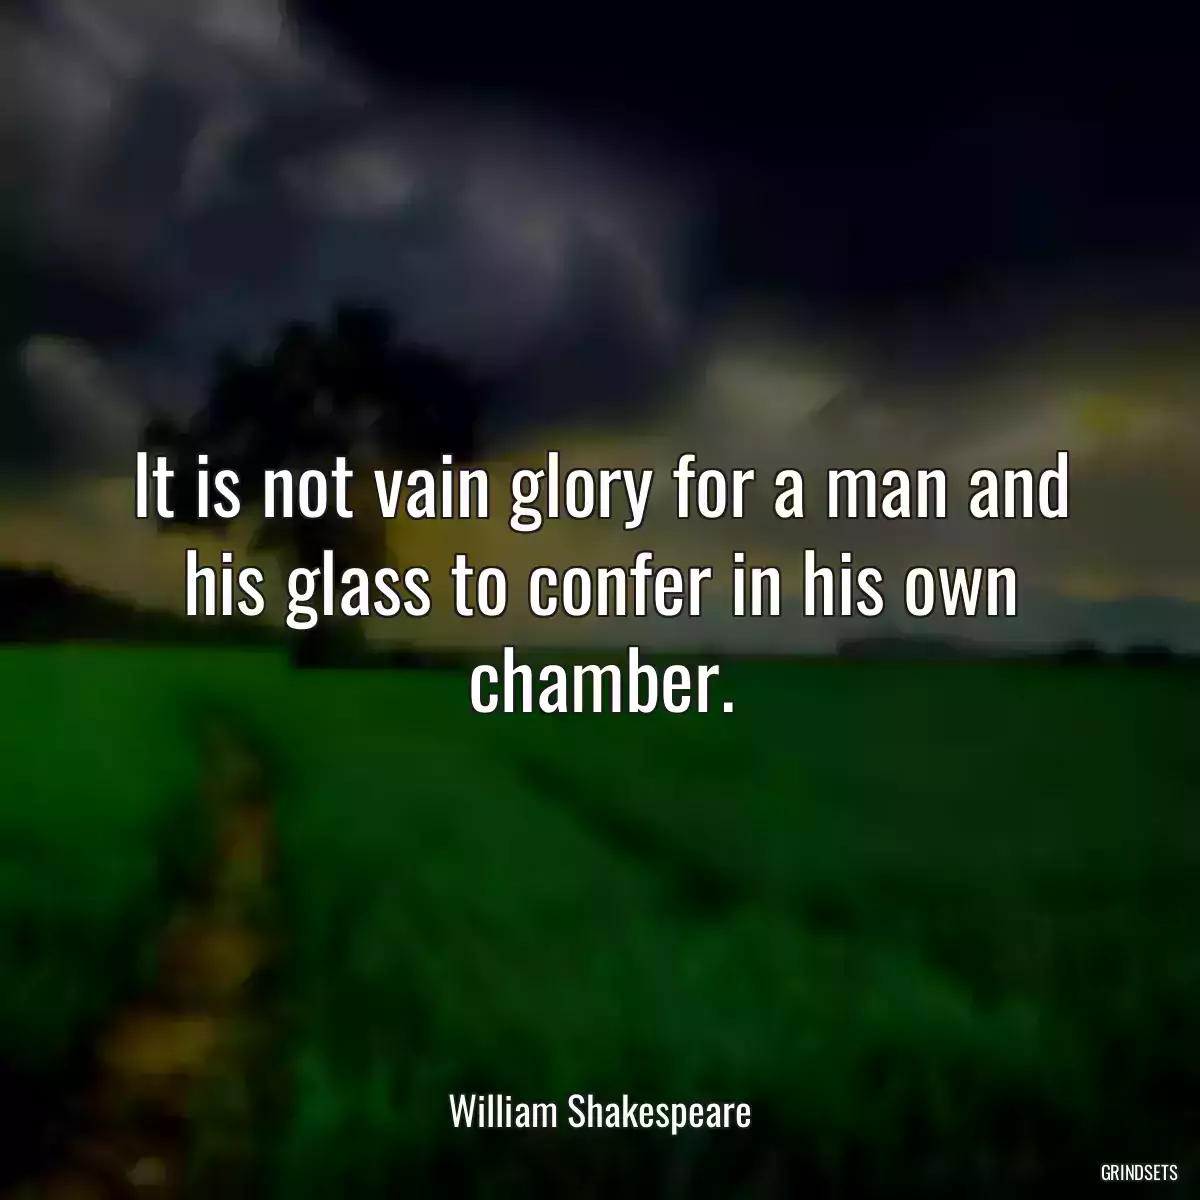 It is not vain glory for a man and his glass to confer in his own chamber.